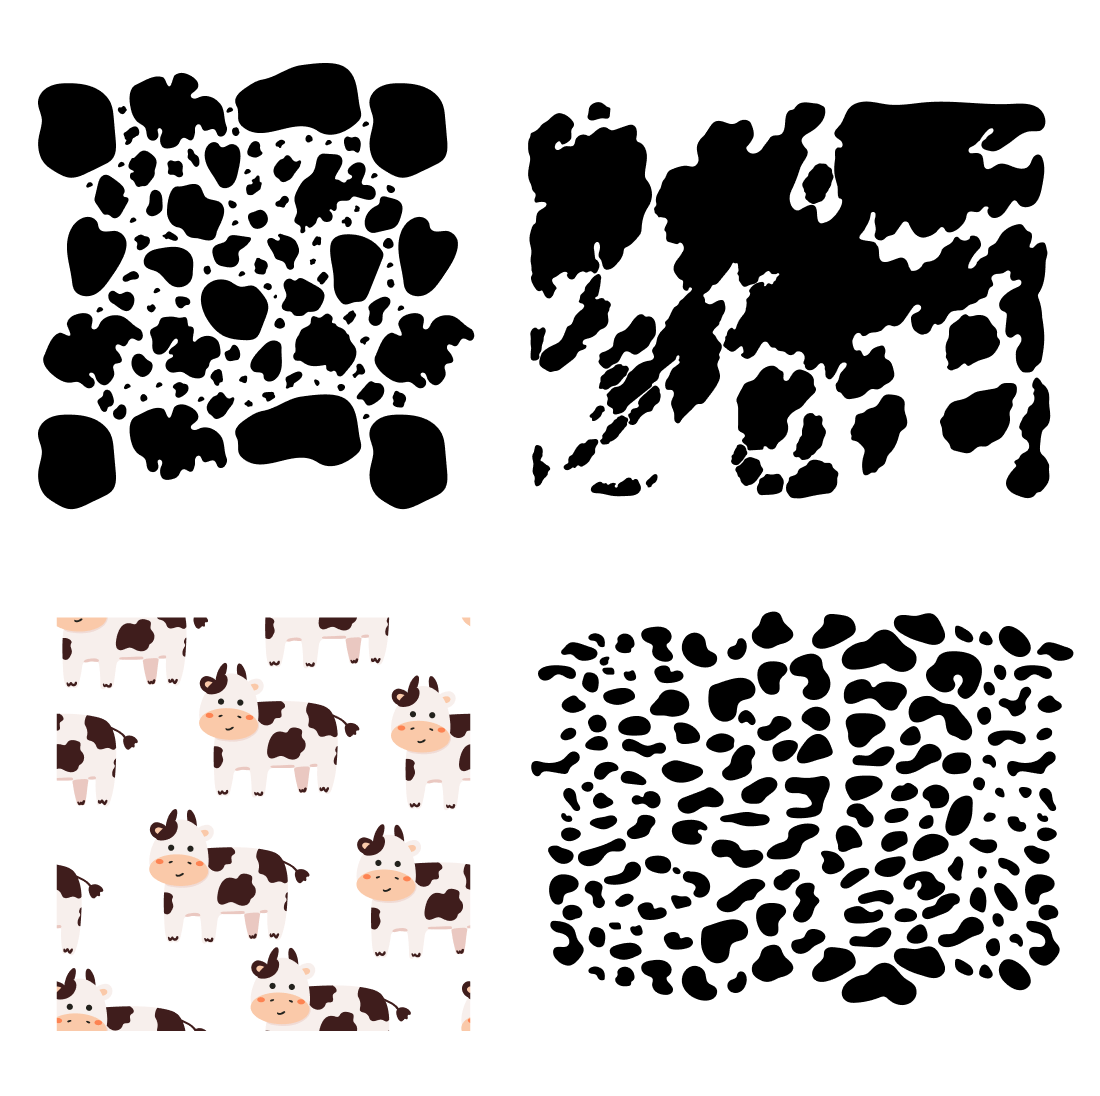 Images of prints with cow coloring, as well as small cows with black spots.